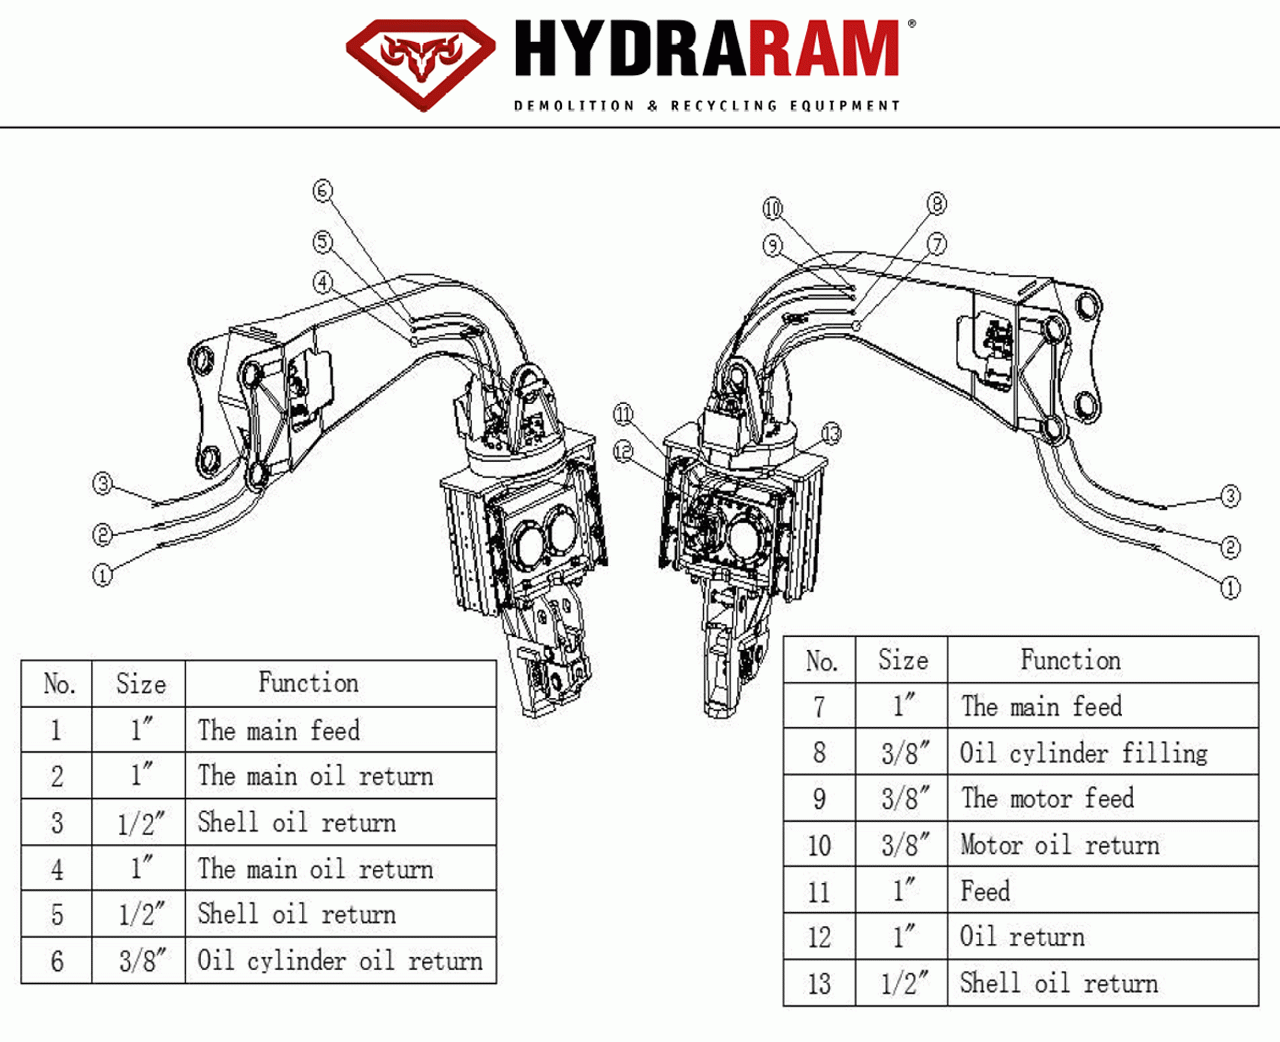 new-2021-hydraram-175-hyd-hp-sheet-pile-driver-45-65-ton-class-excavator-or-perfect-on-our-pc450lc-8-long-reach-big-8